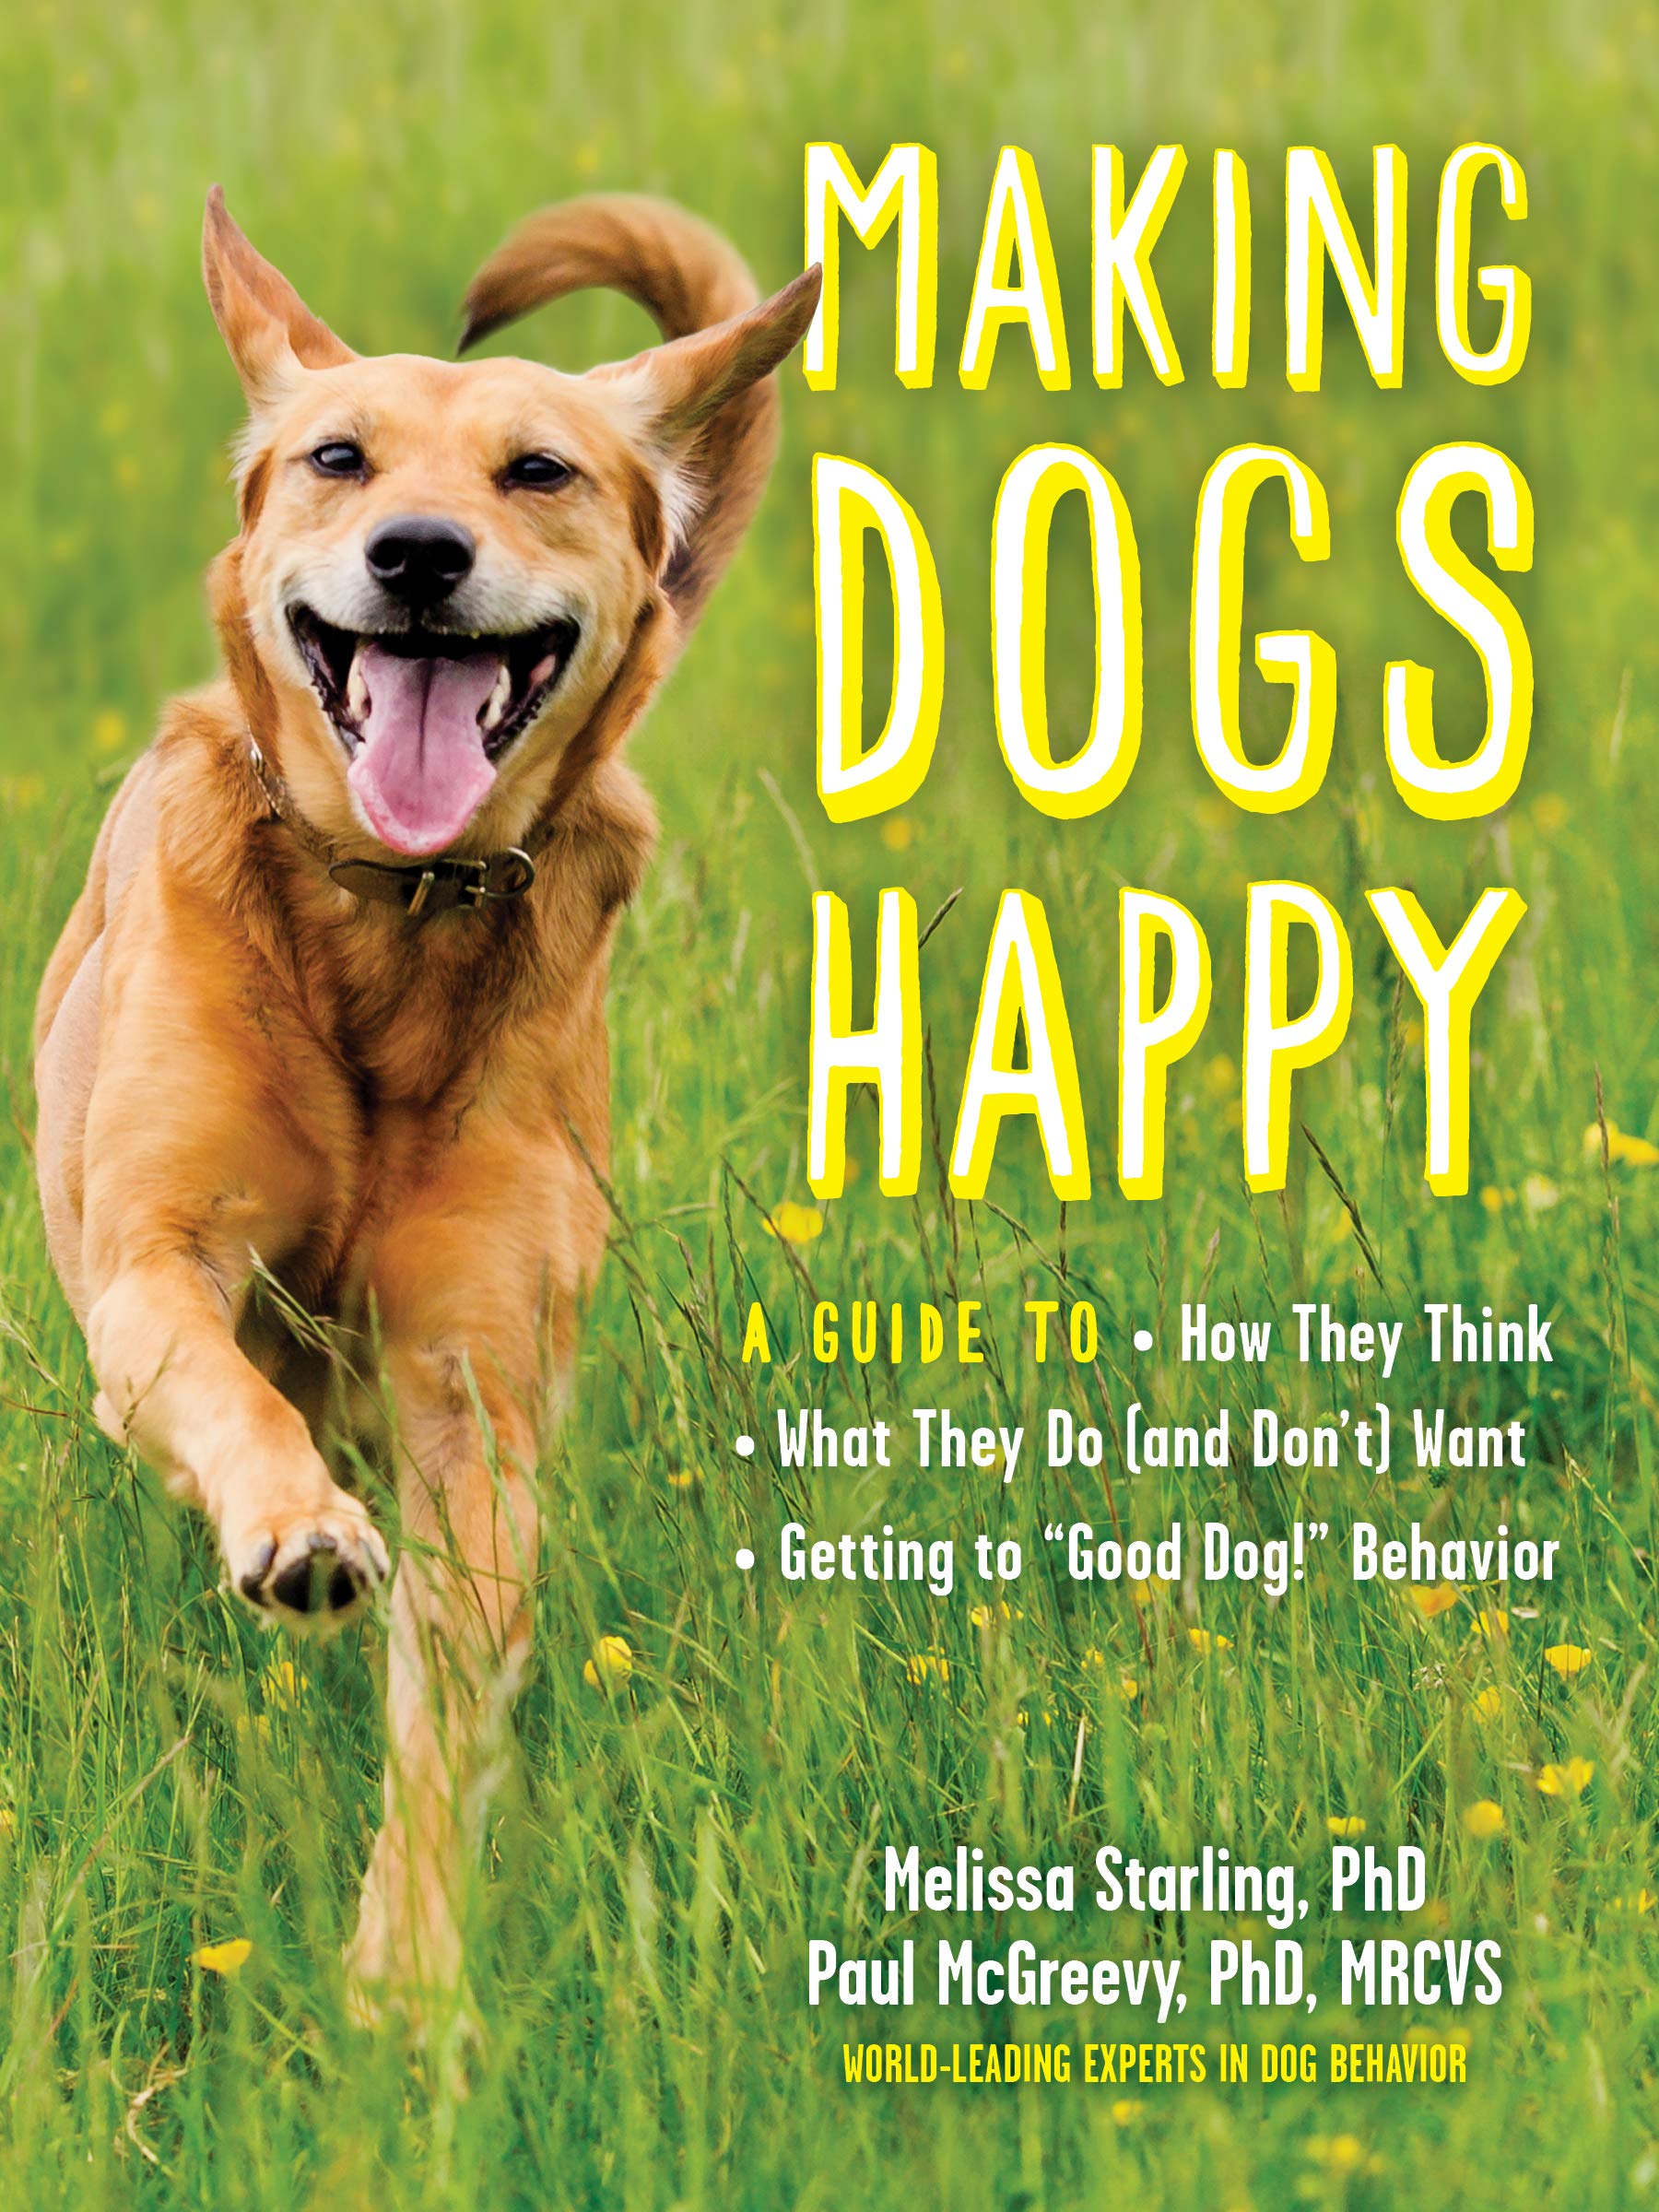 Making Dogs Happy: A Guide to How They Think, What They Do (and Don't) Want, and Getting to "Good Dog" Behavior - Third Eye